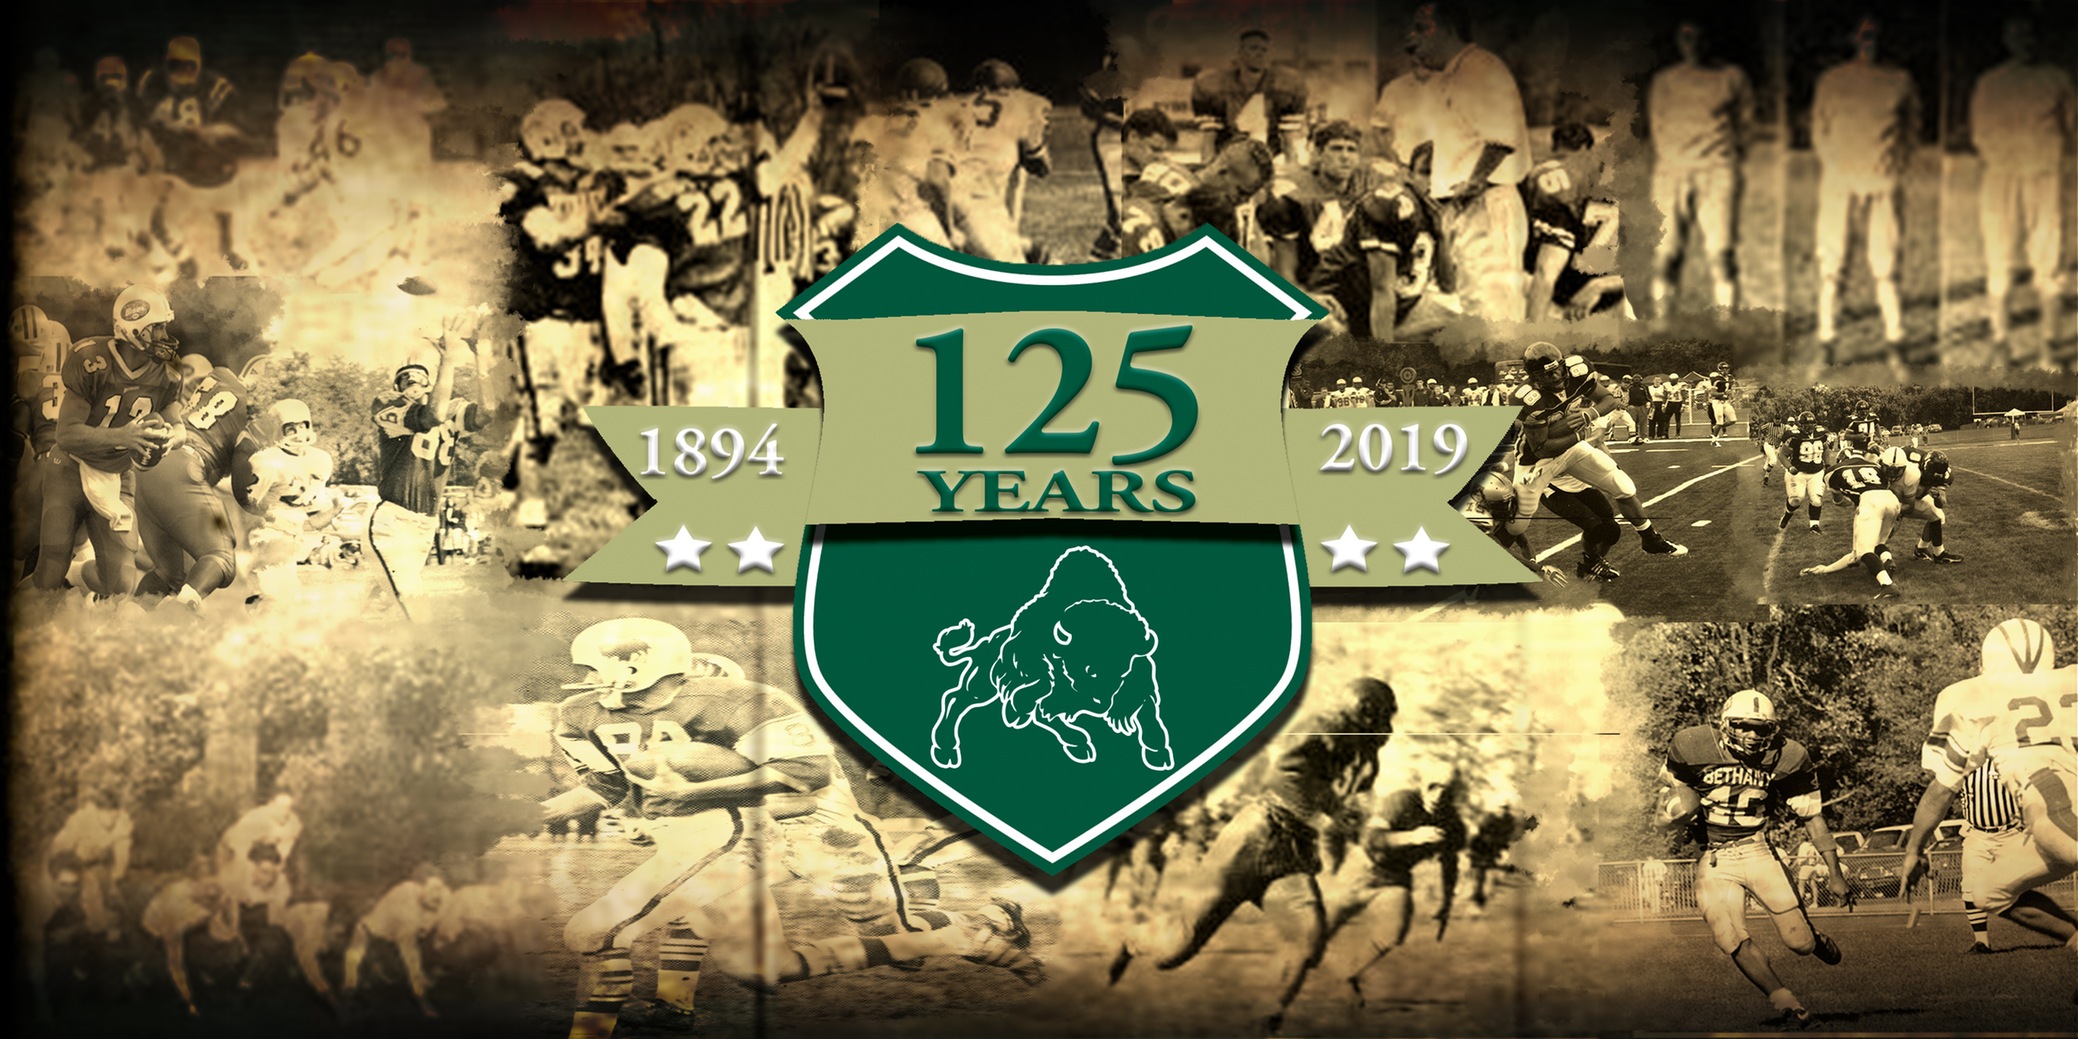 Bethany to Celebrate 125 Years of Football in 2019